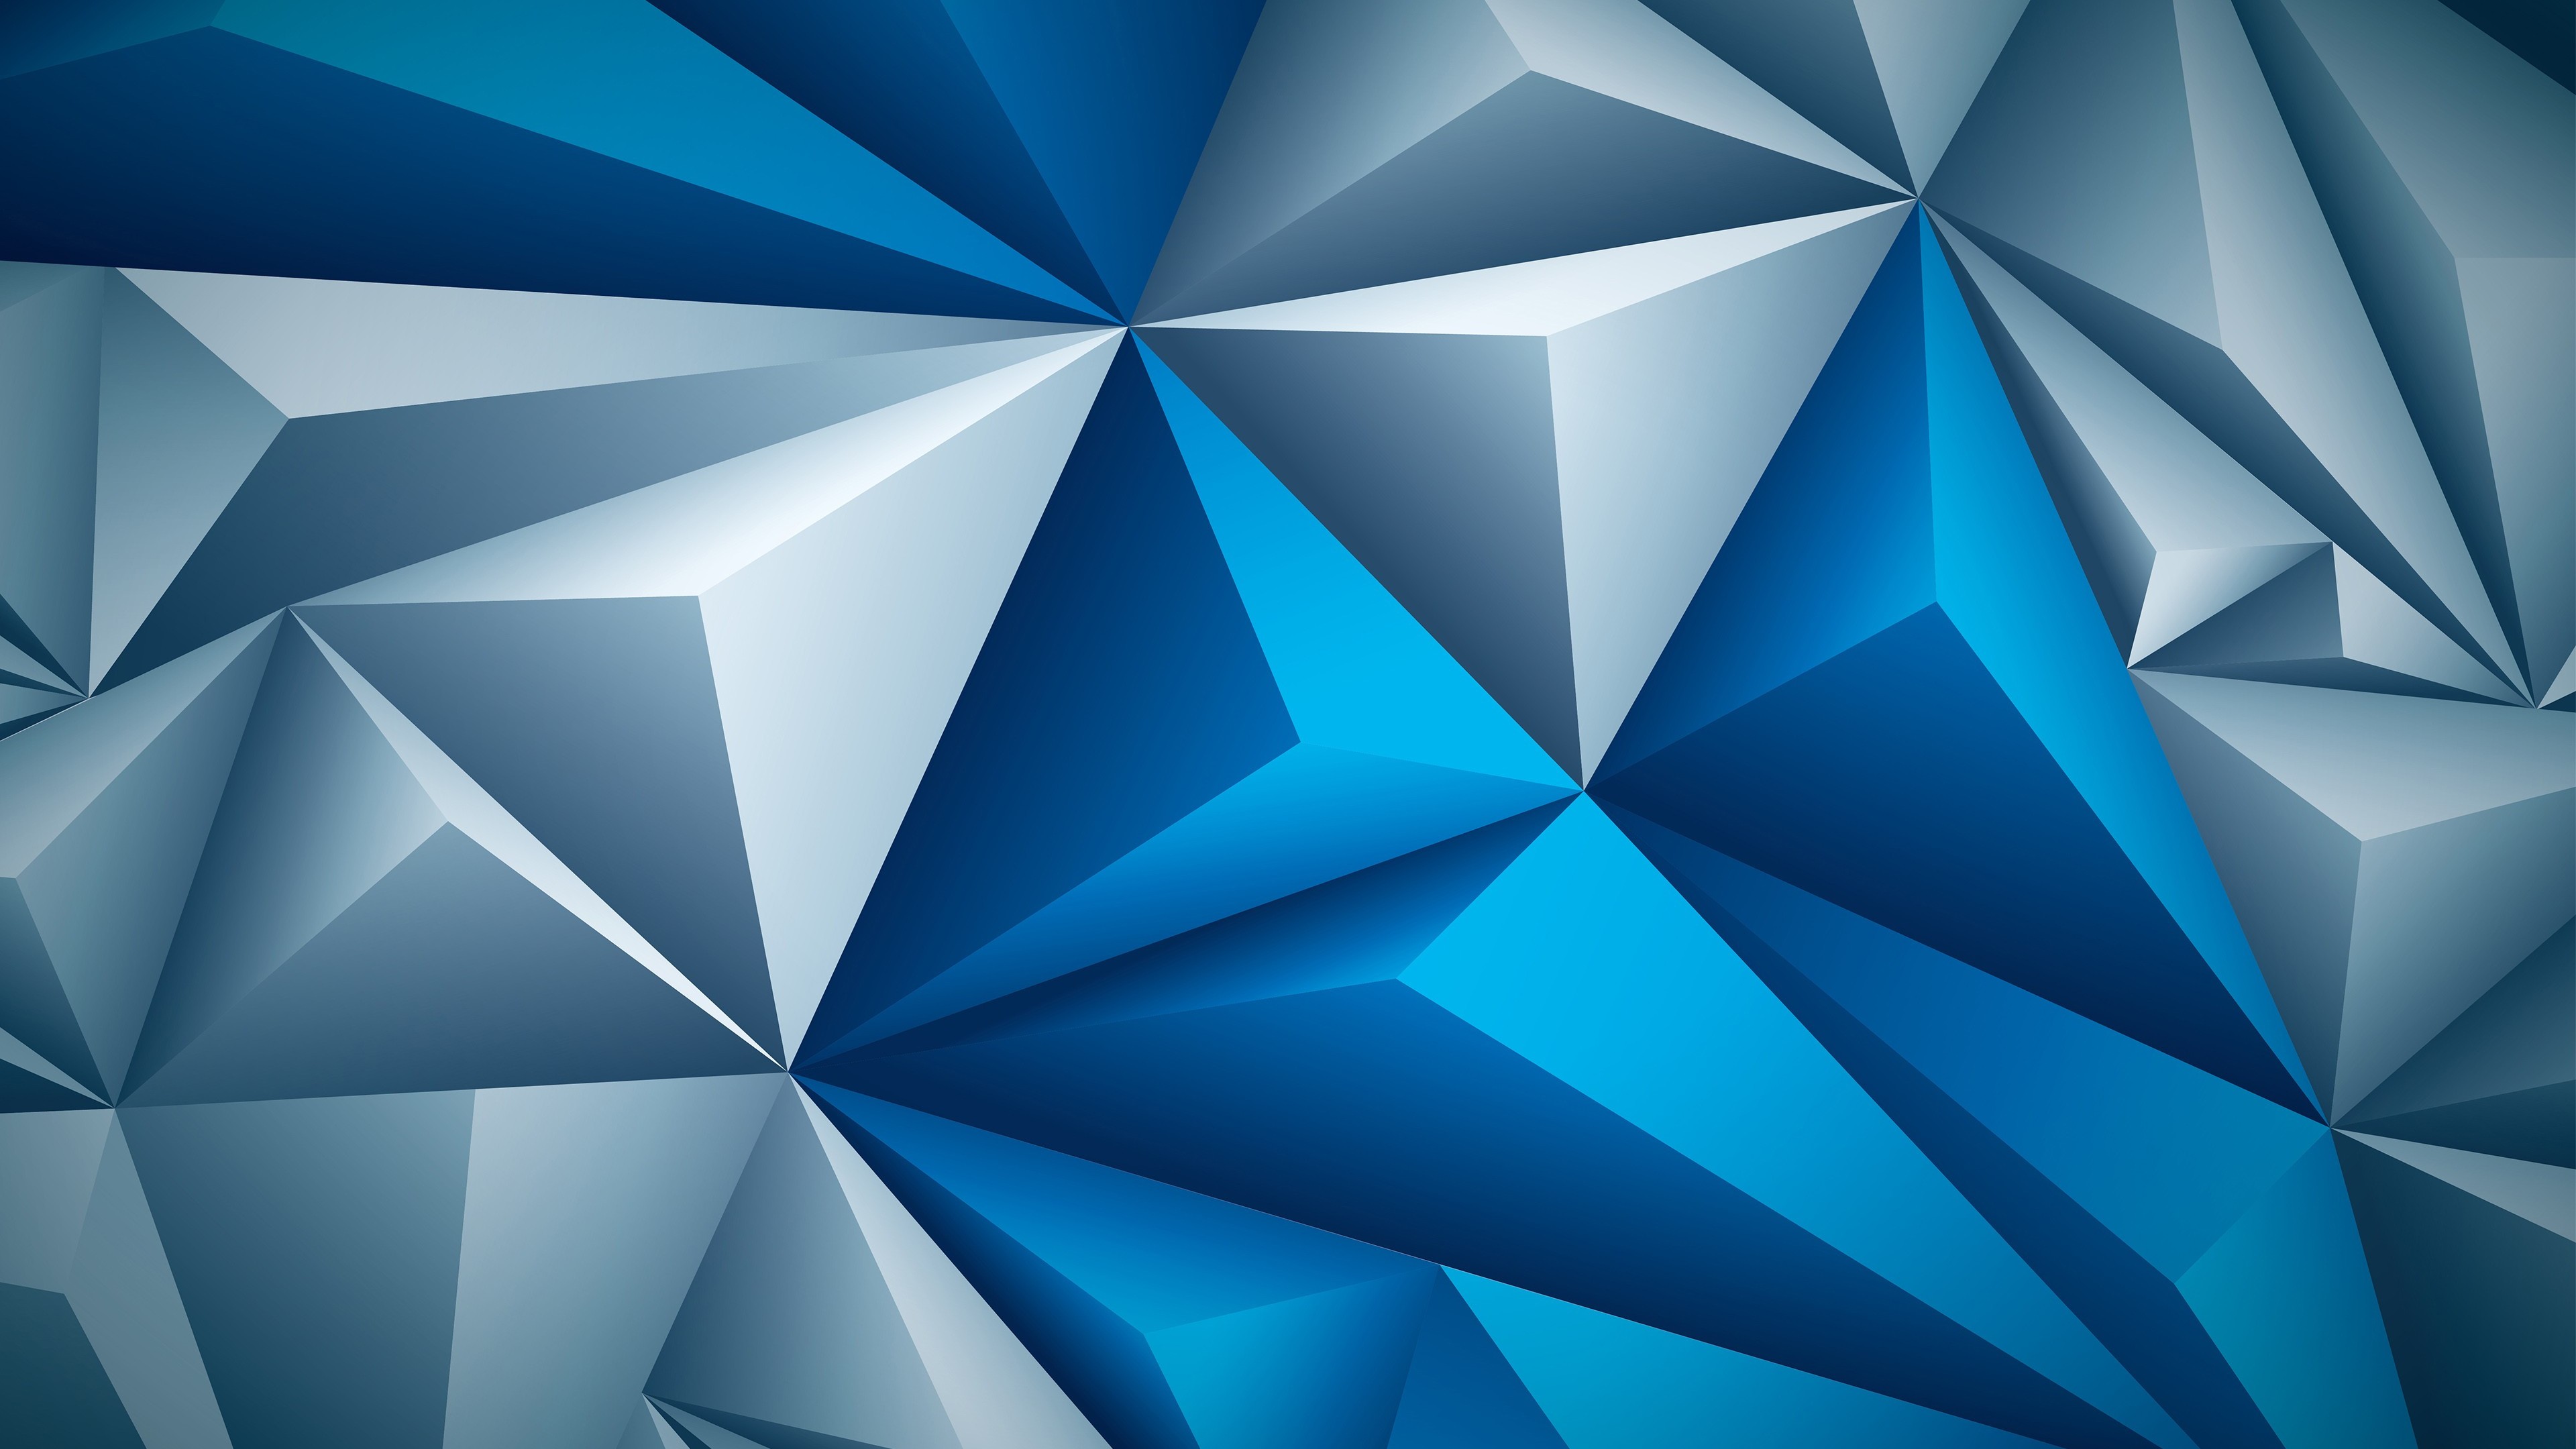 Abstract 3d Modern Geometrical Wallpapers 4k Download Background, 3d  Rendering Geometric Unique Backgrounds For Posters And Flyers Or Print  Packaging, Hd Photography Photo Background Image And Wallpaper for Free  Download